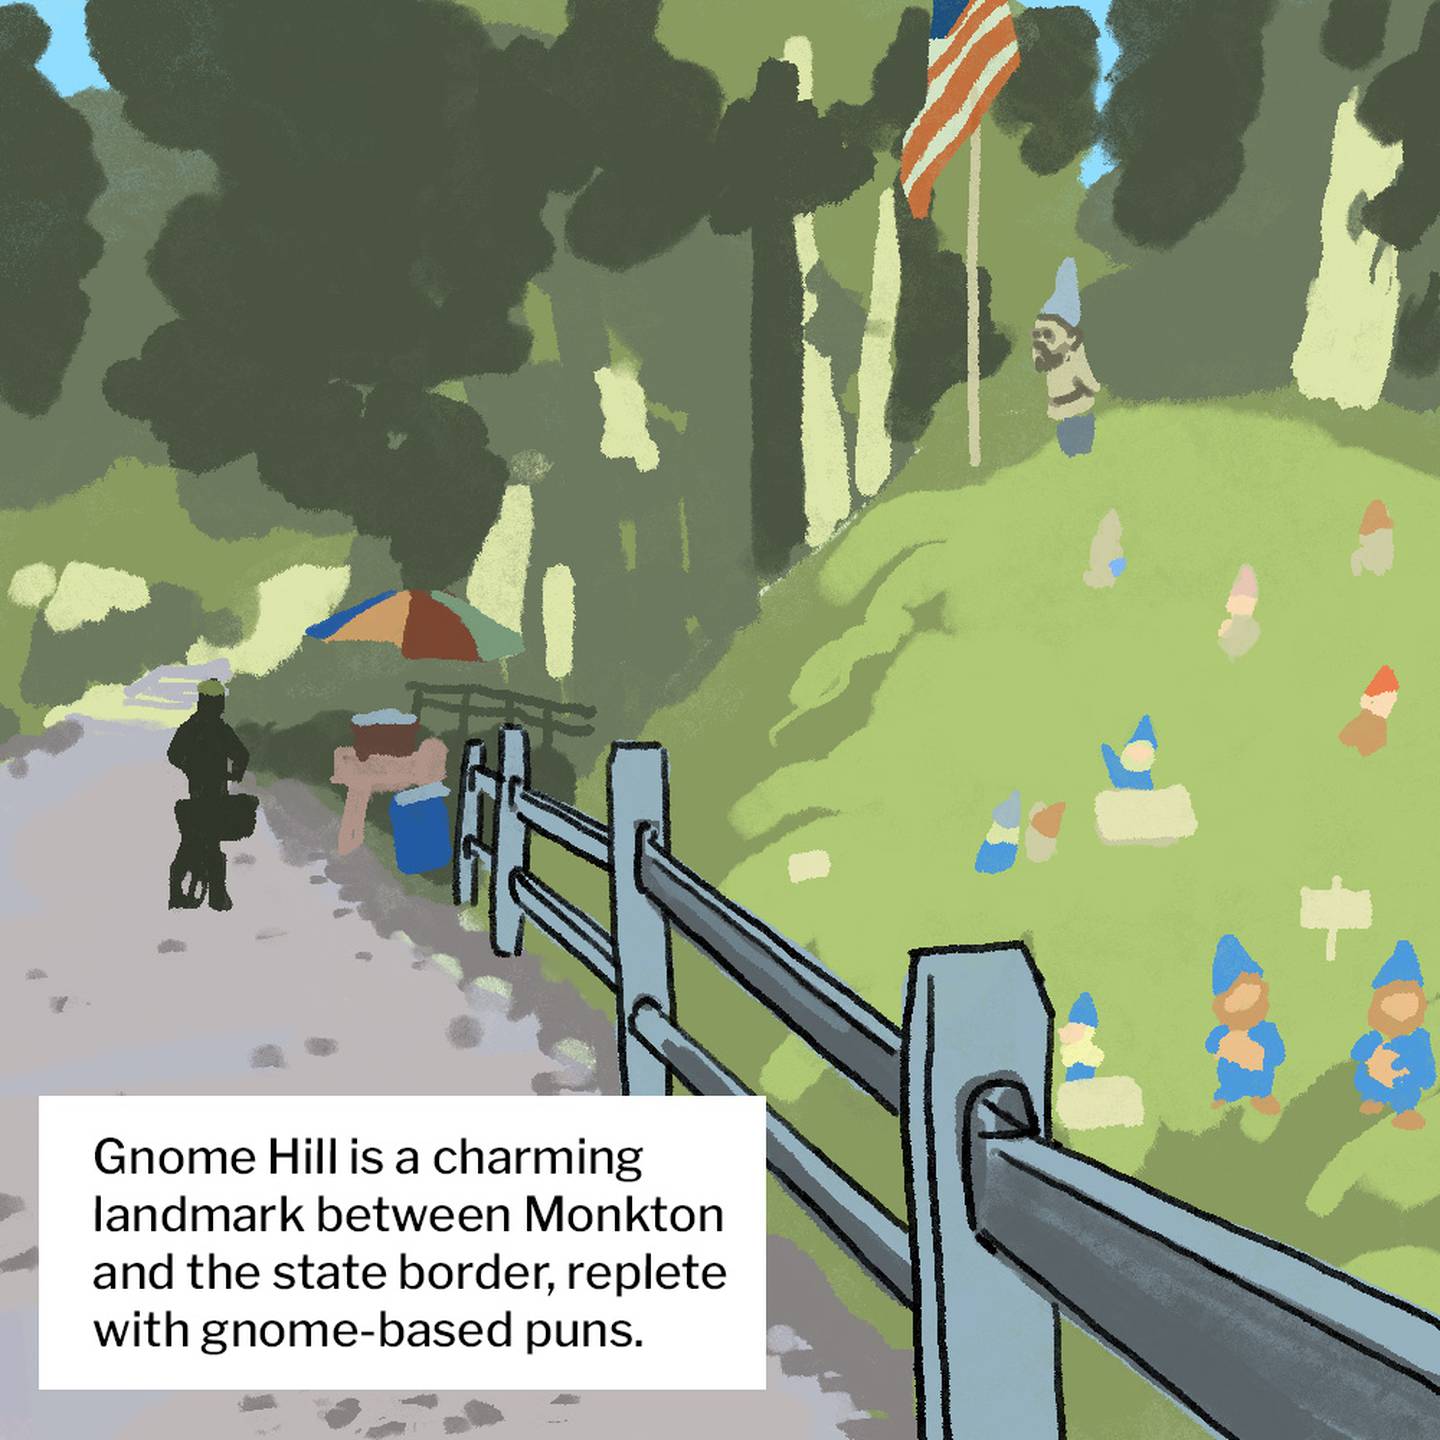 Illustration of grassy hill separated from gravel trail by a wooden fence, with trees, a colorful umbrella and a man's silhouette on a bike in the background. The hill is dotted with small gnome statues, with a tall gnome and an American flag on the top.